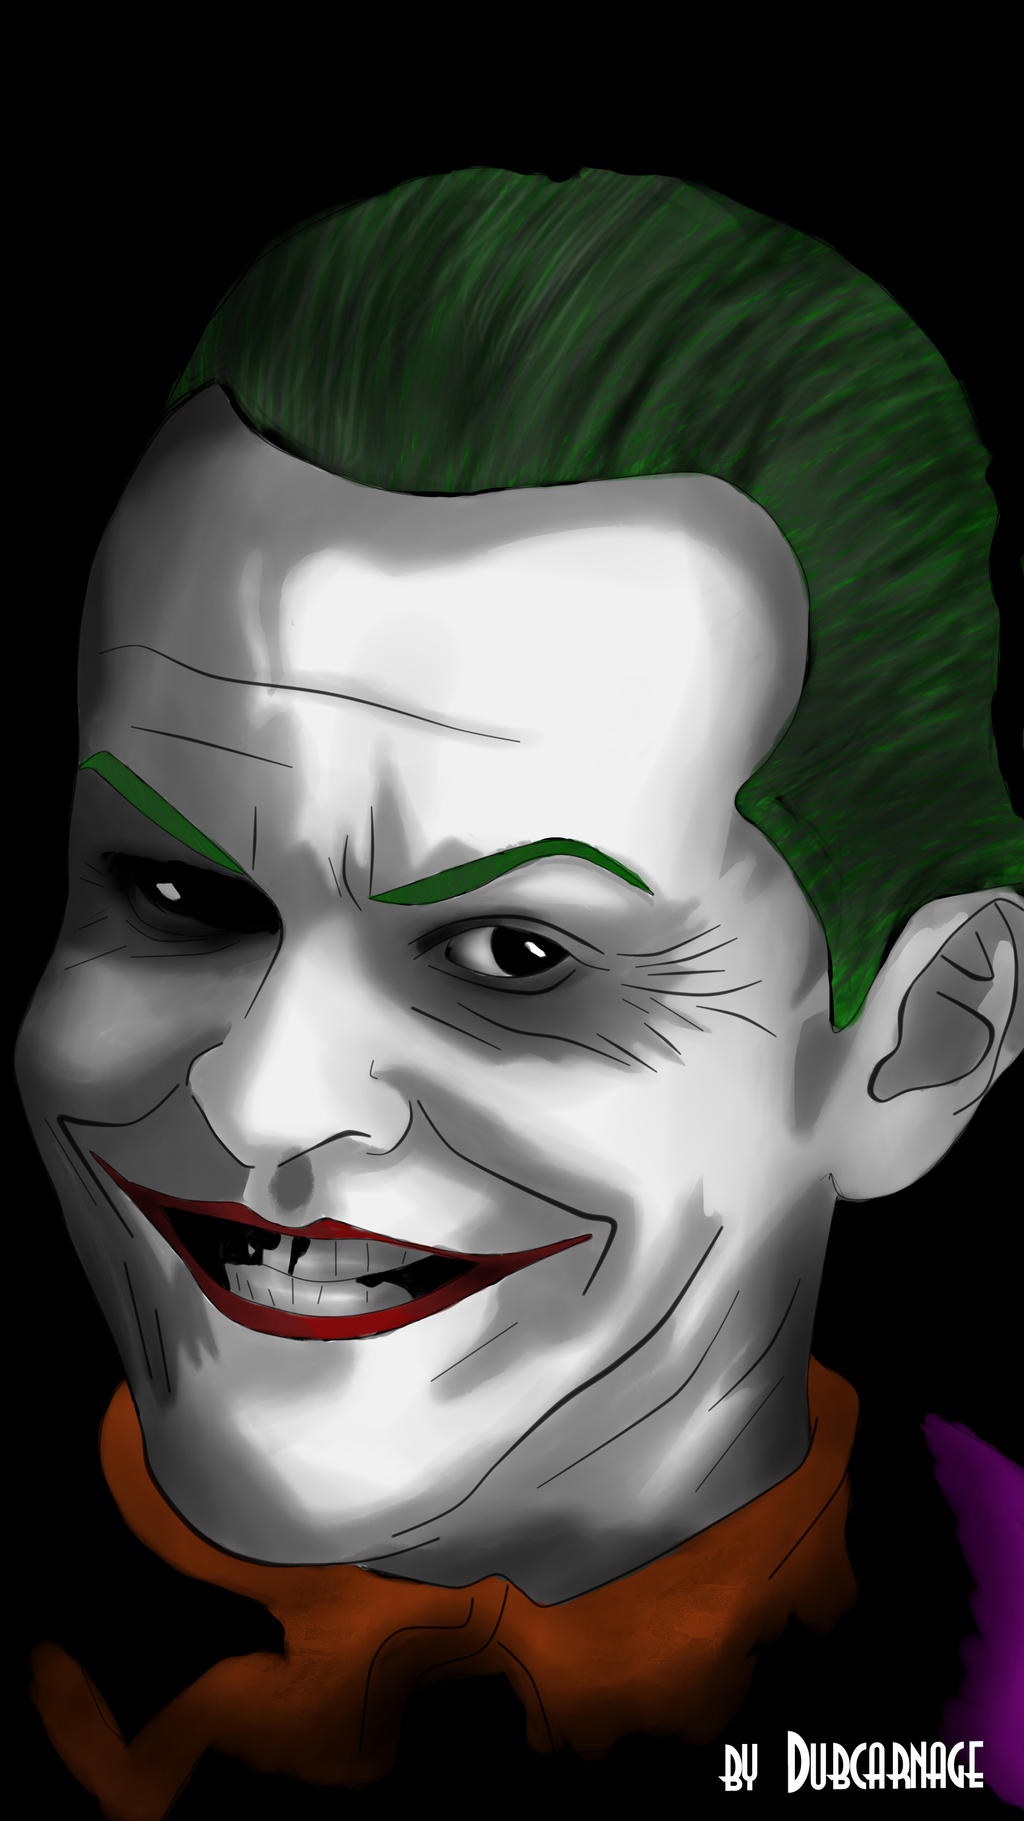 Jack Nicholson As The Joker Pictures Wallpapers